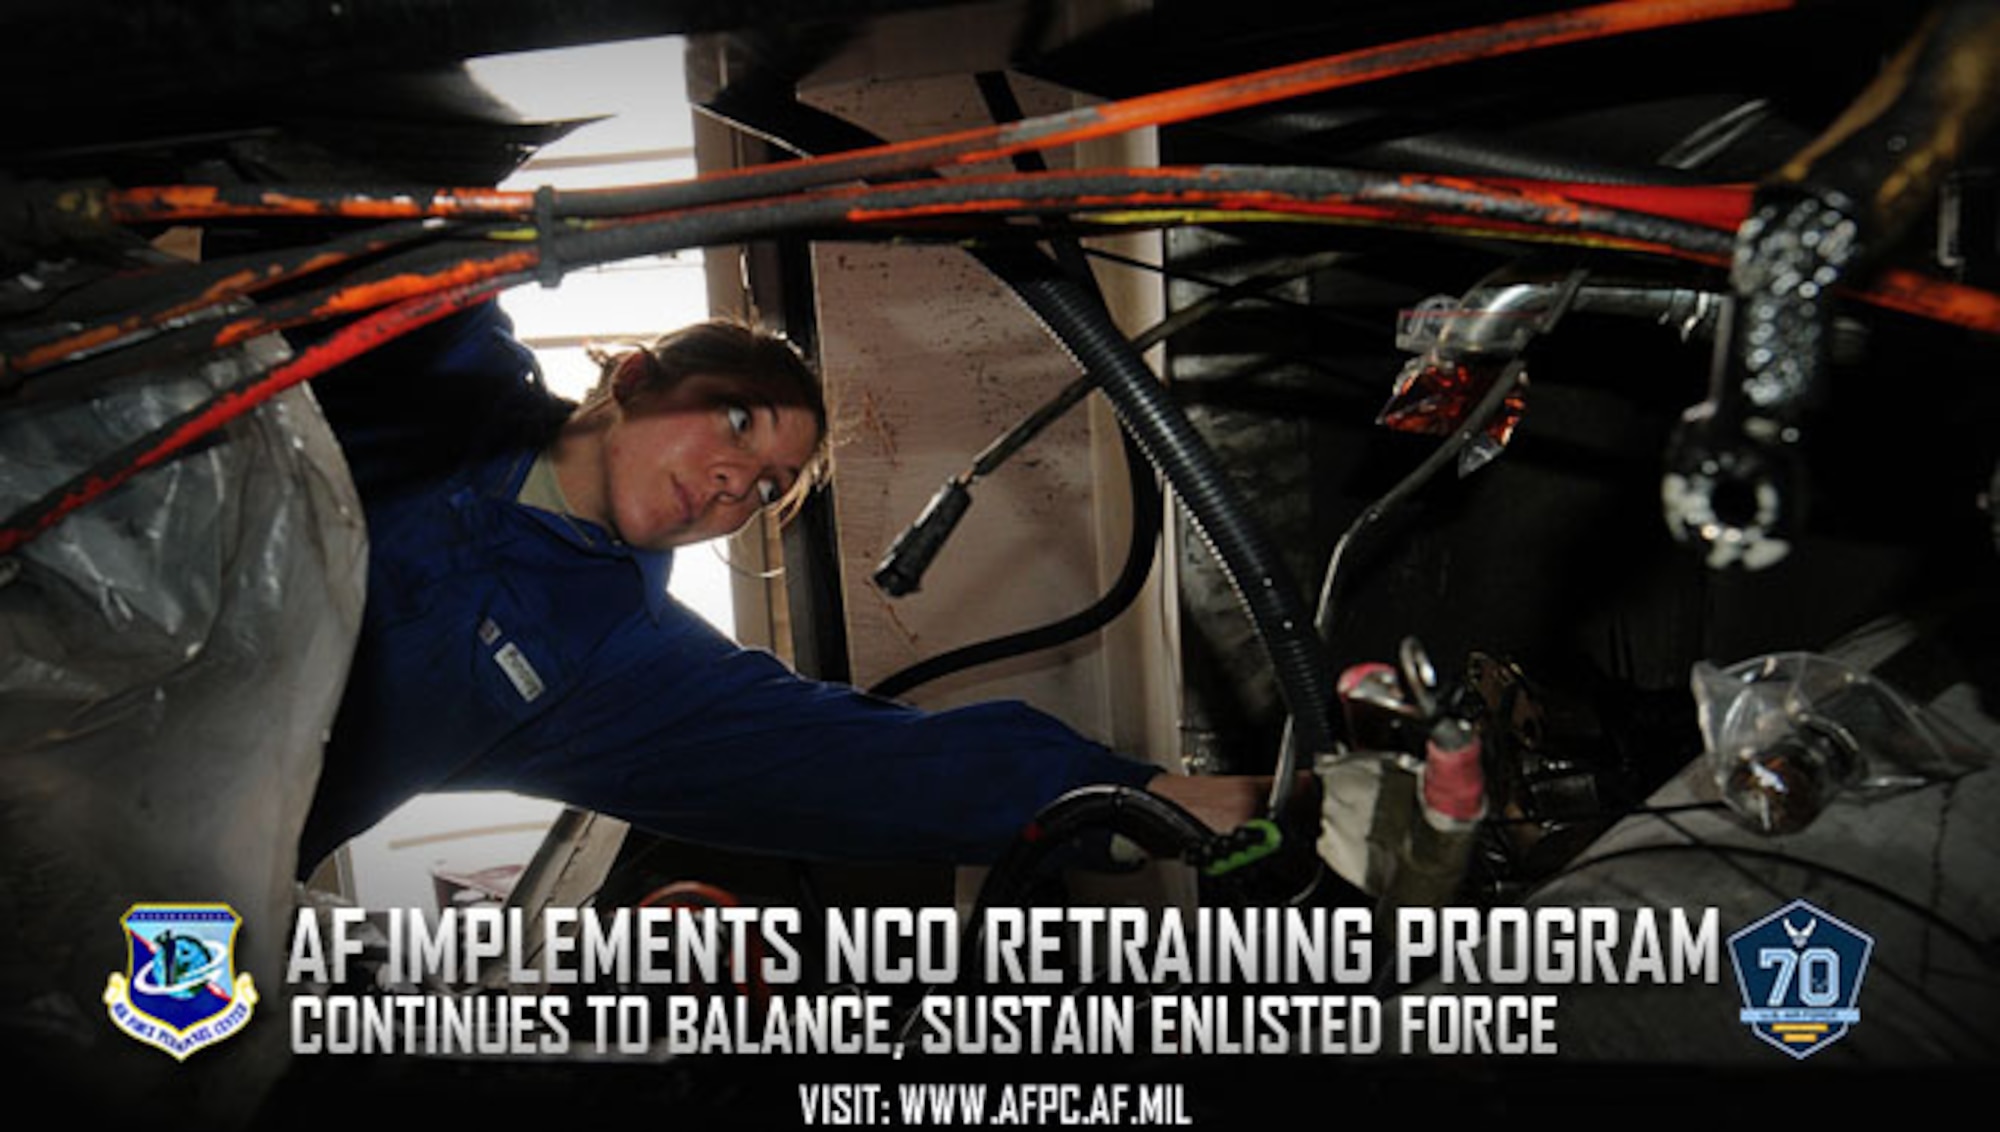 The Noncommissioned Officer Retraining Program allows second-term and career Airmen to retrain into undermanned career field in order to balance and sustain the enlisted force as the Air Force continues to grow. (U.S. Air Force graphic by Kat Bailey)